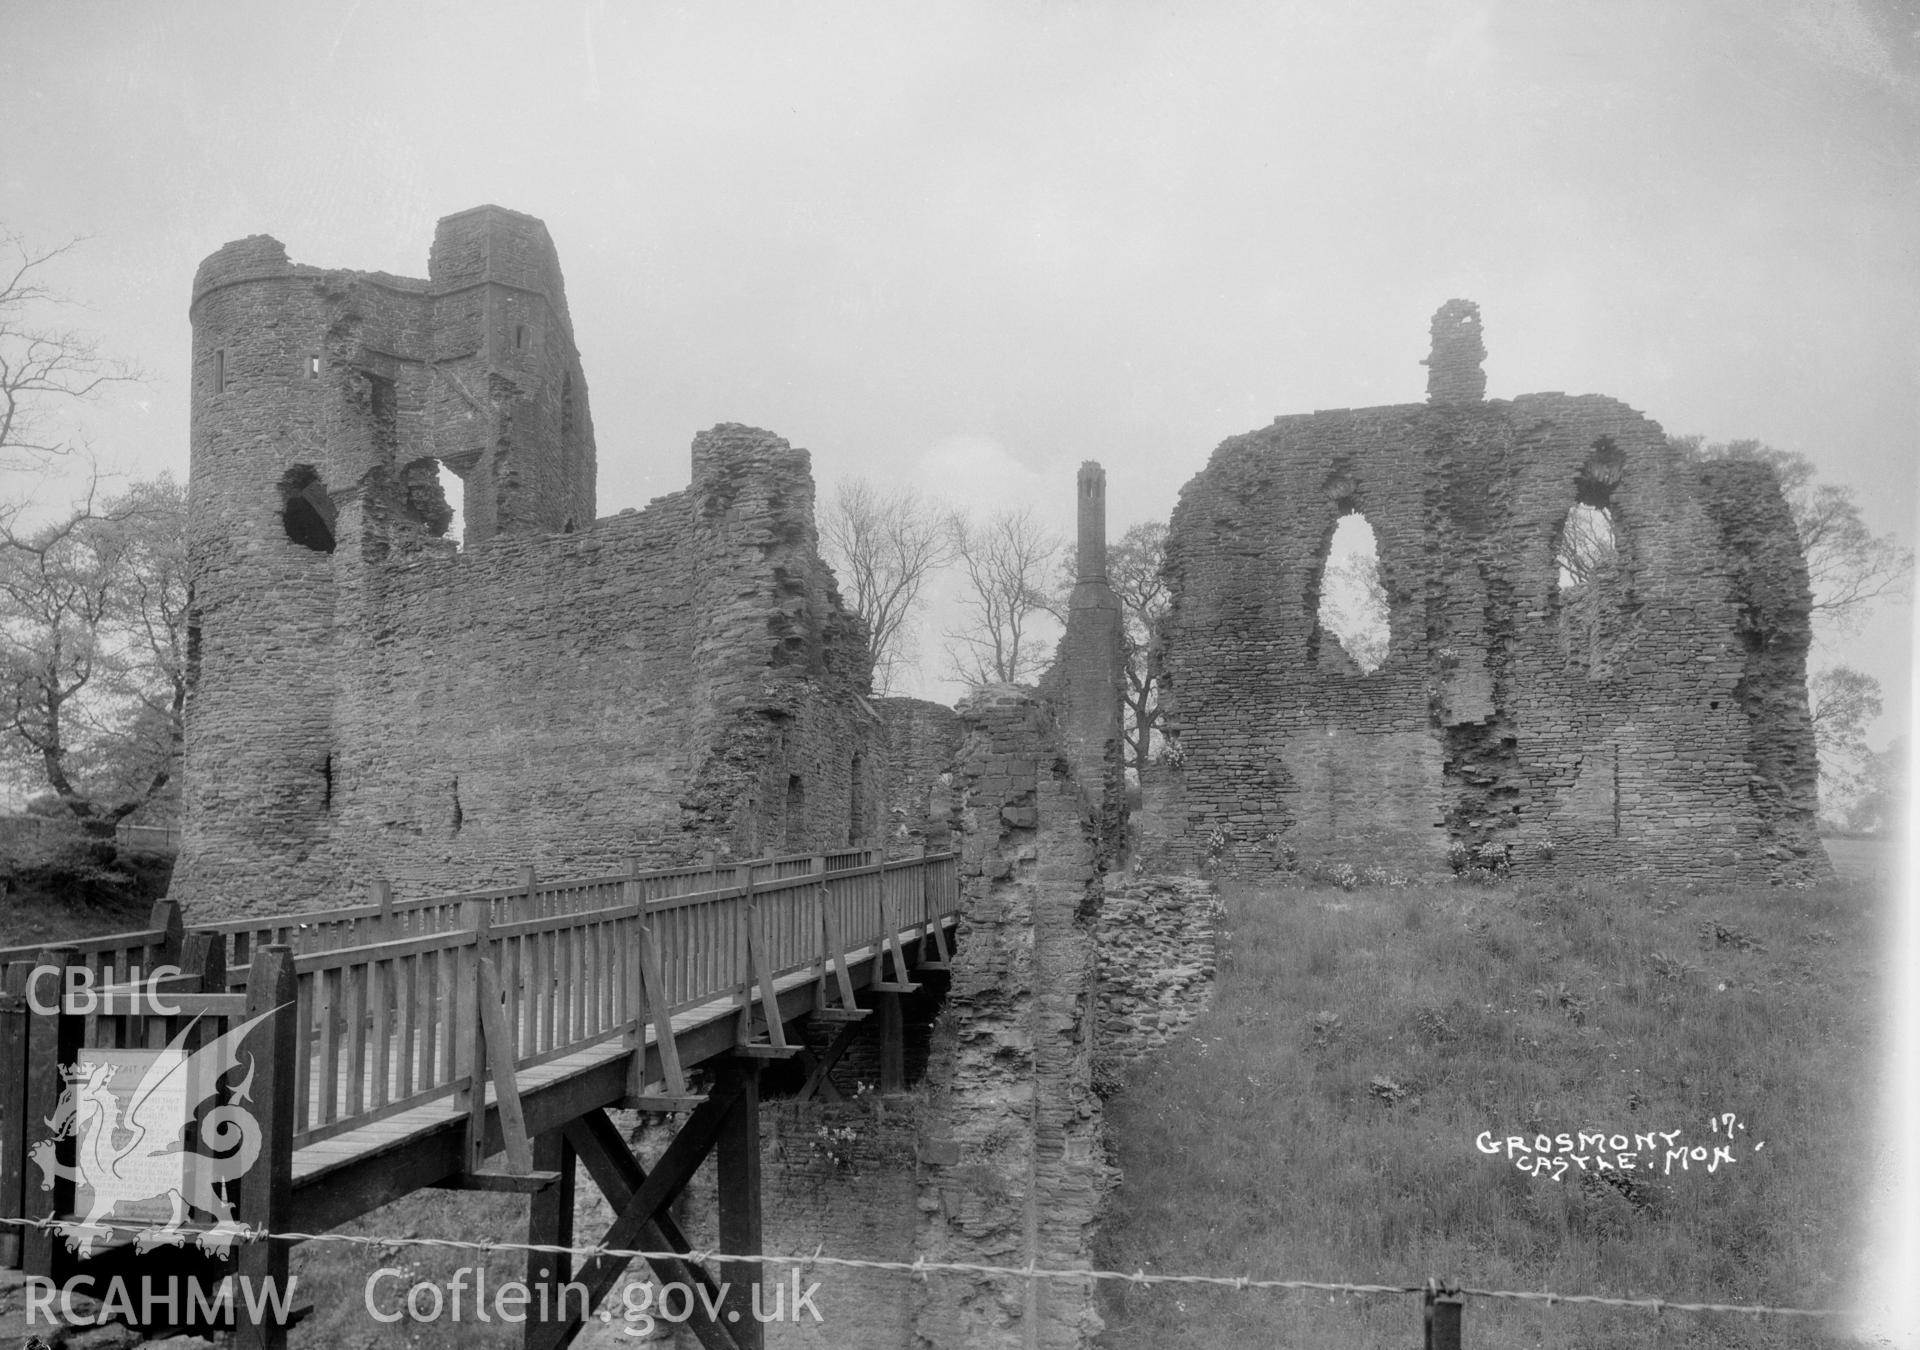 View of the entrance to Grosmont Castle grounds, taken by W A Call pre-1950.